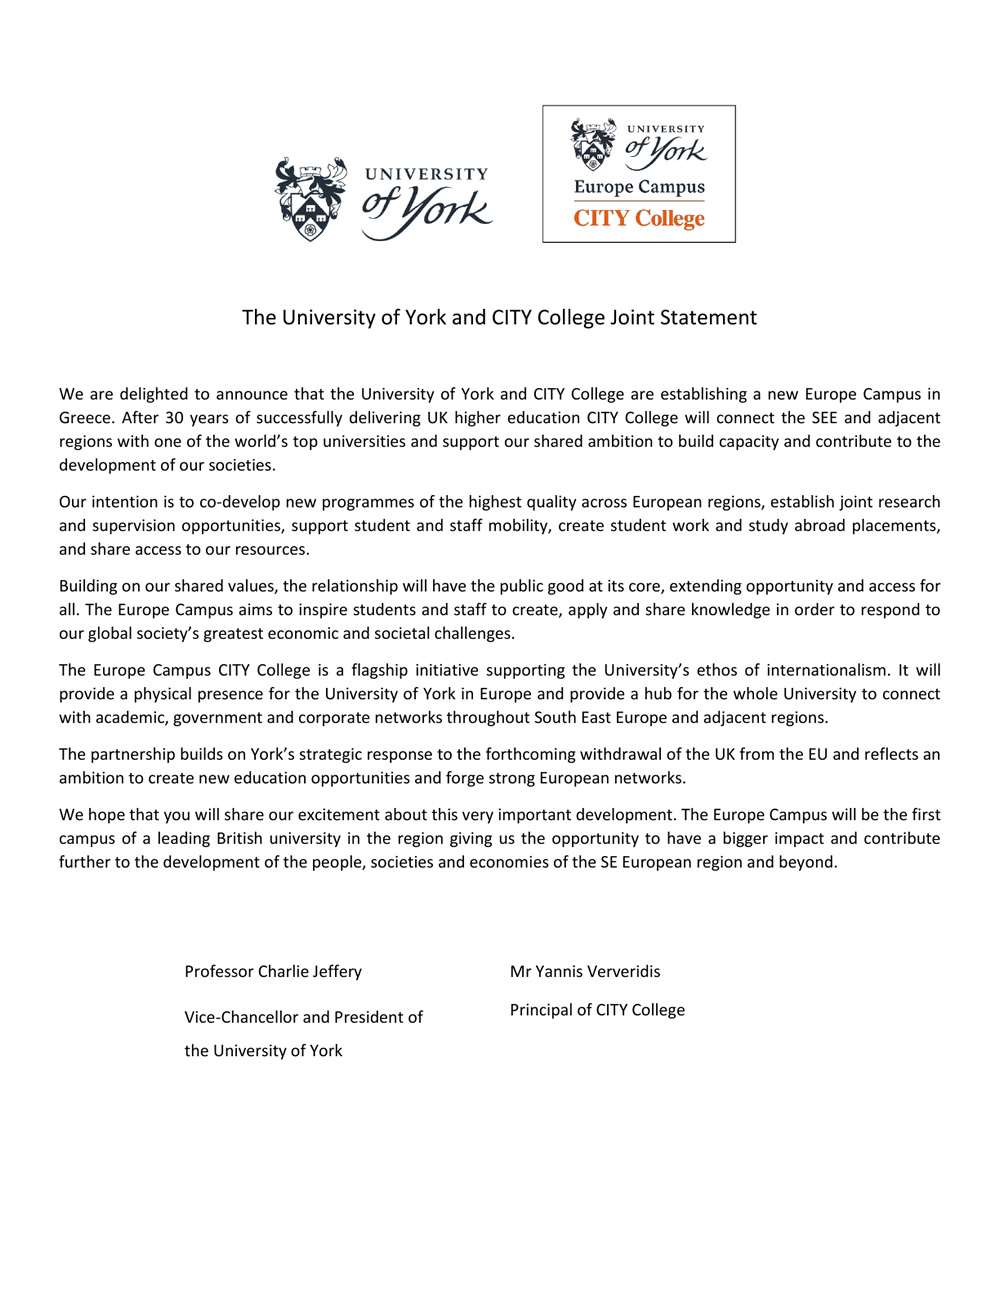 The University of York and CITY College Joint Statement